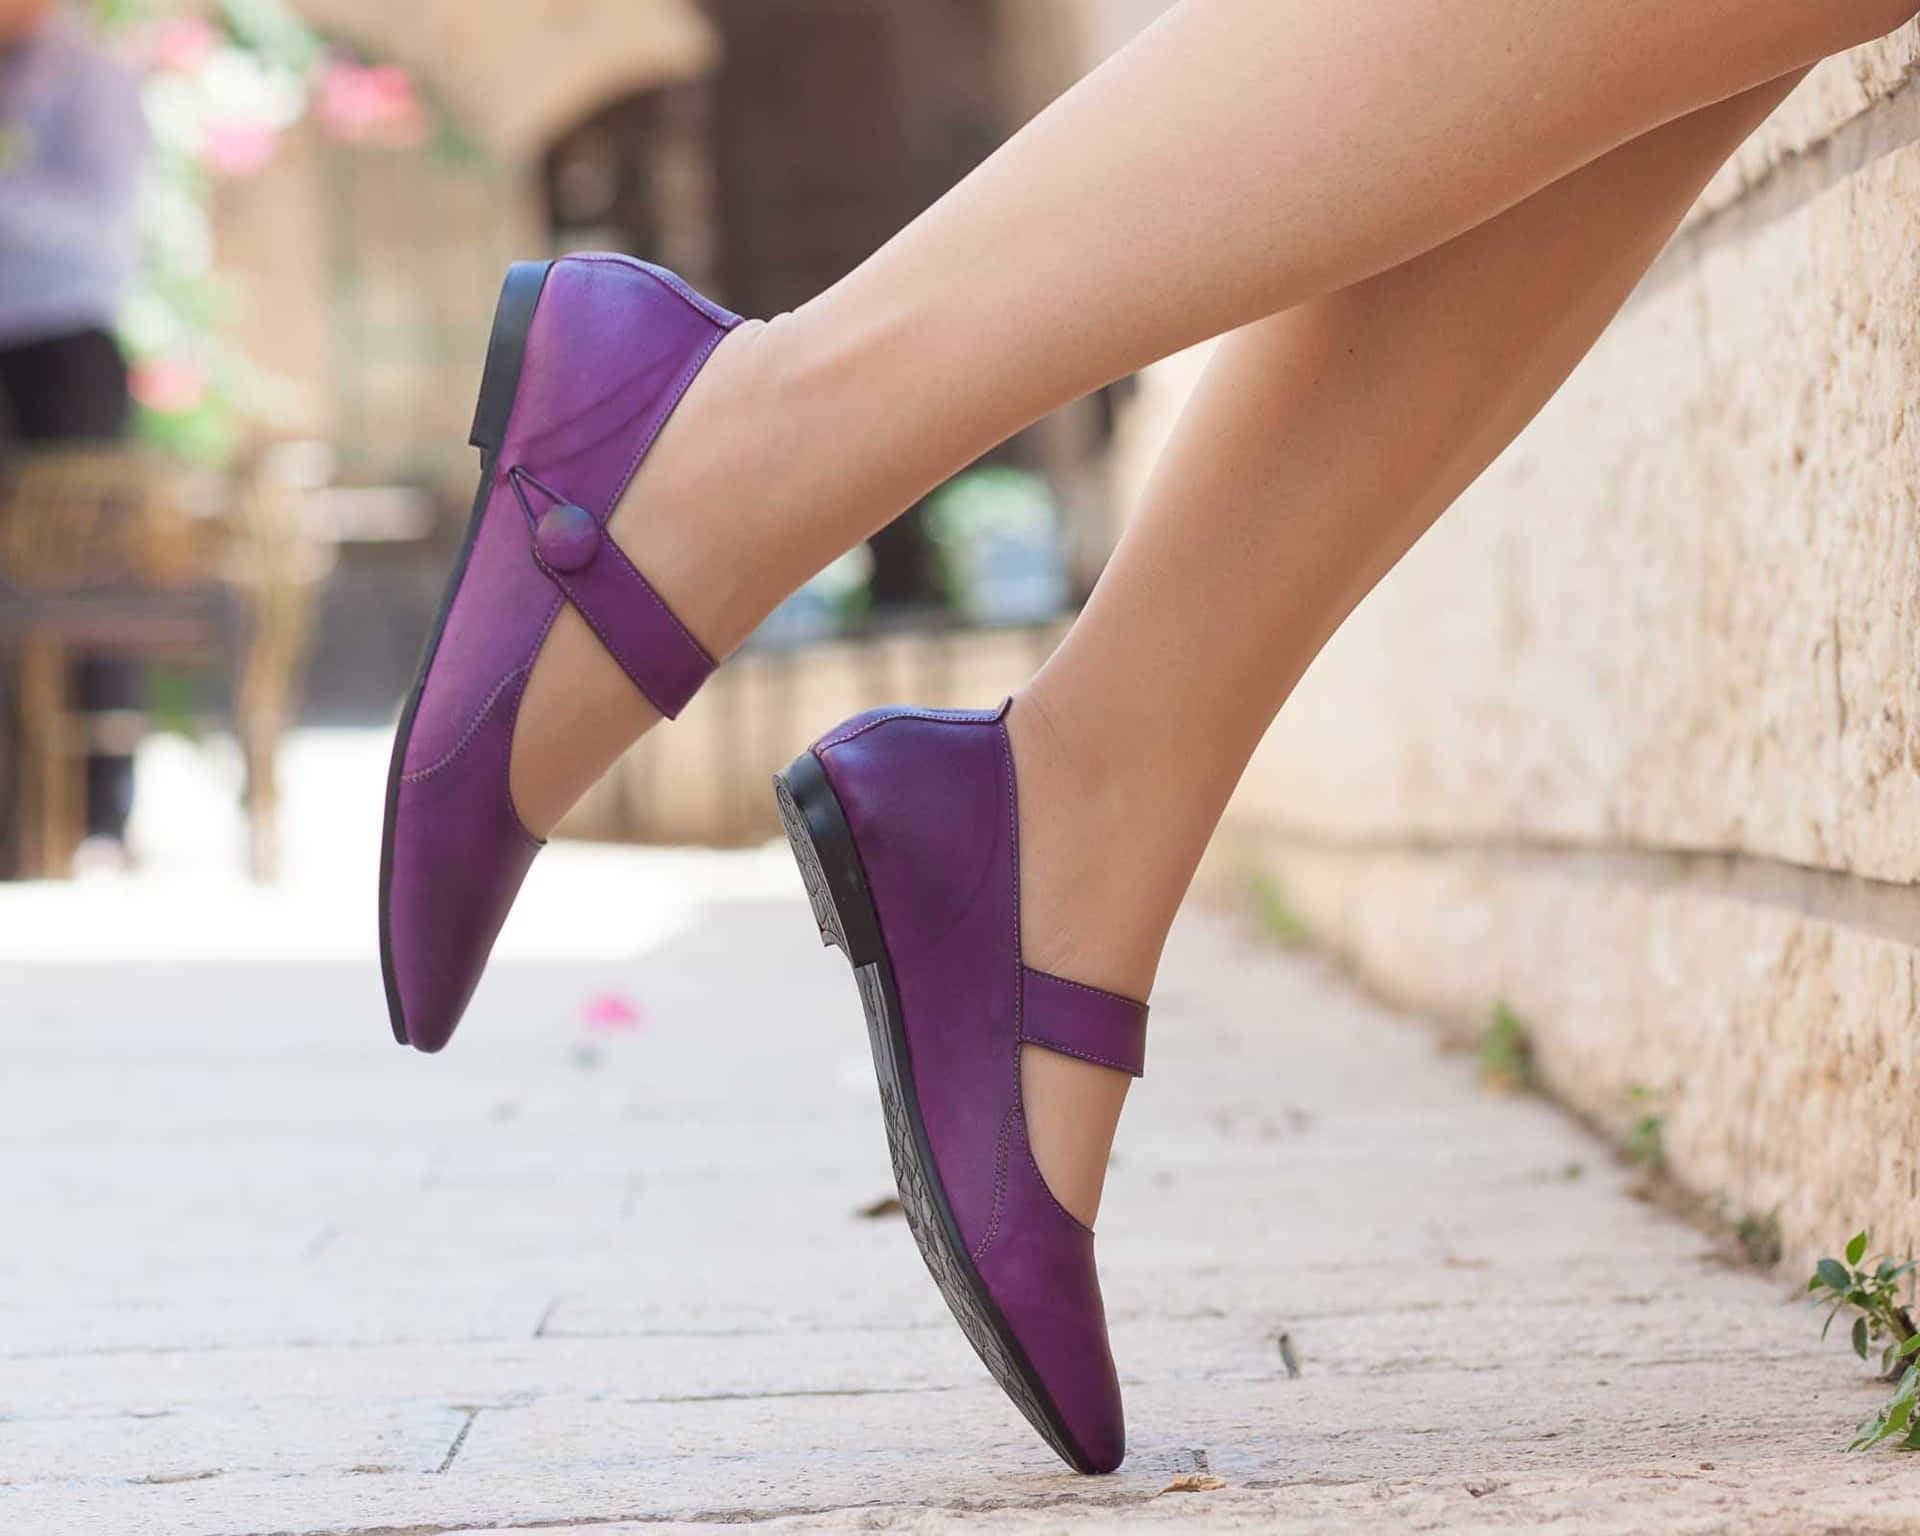 A fashionable pair of purple shoes Wallpaper